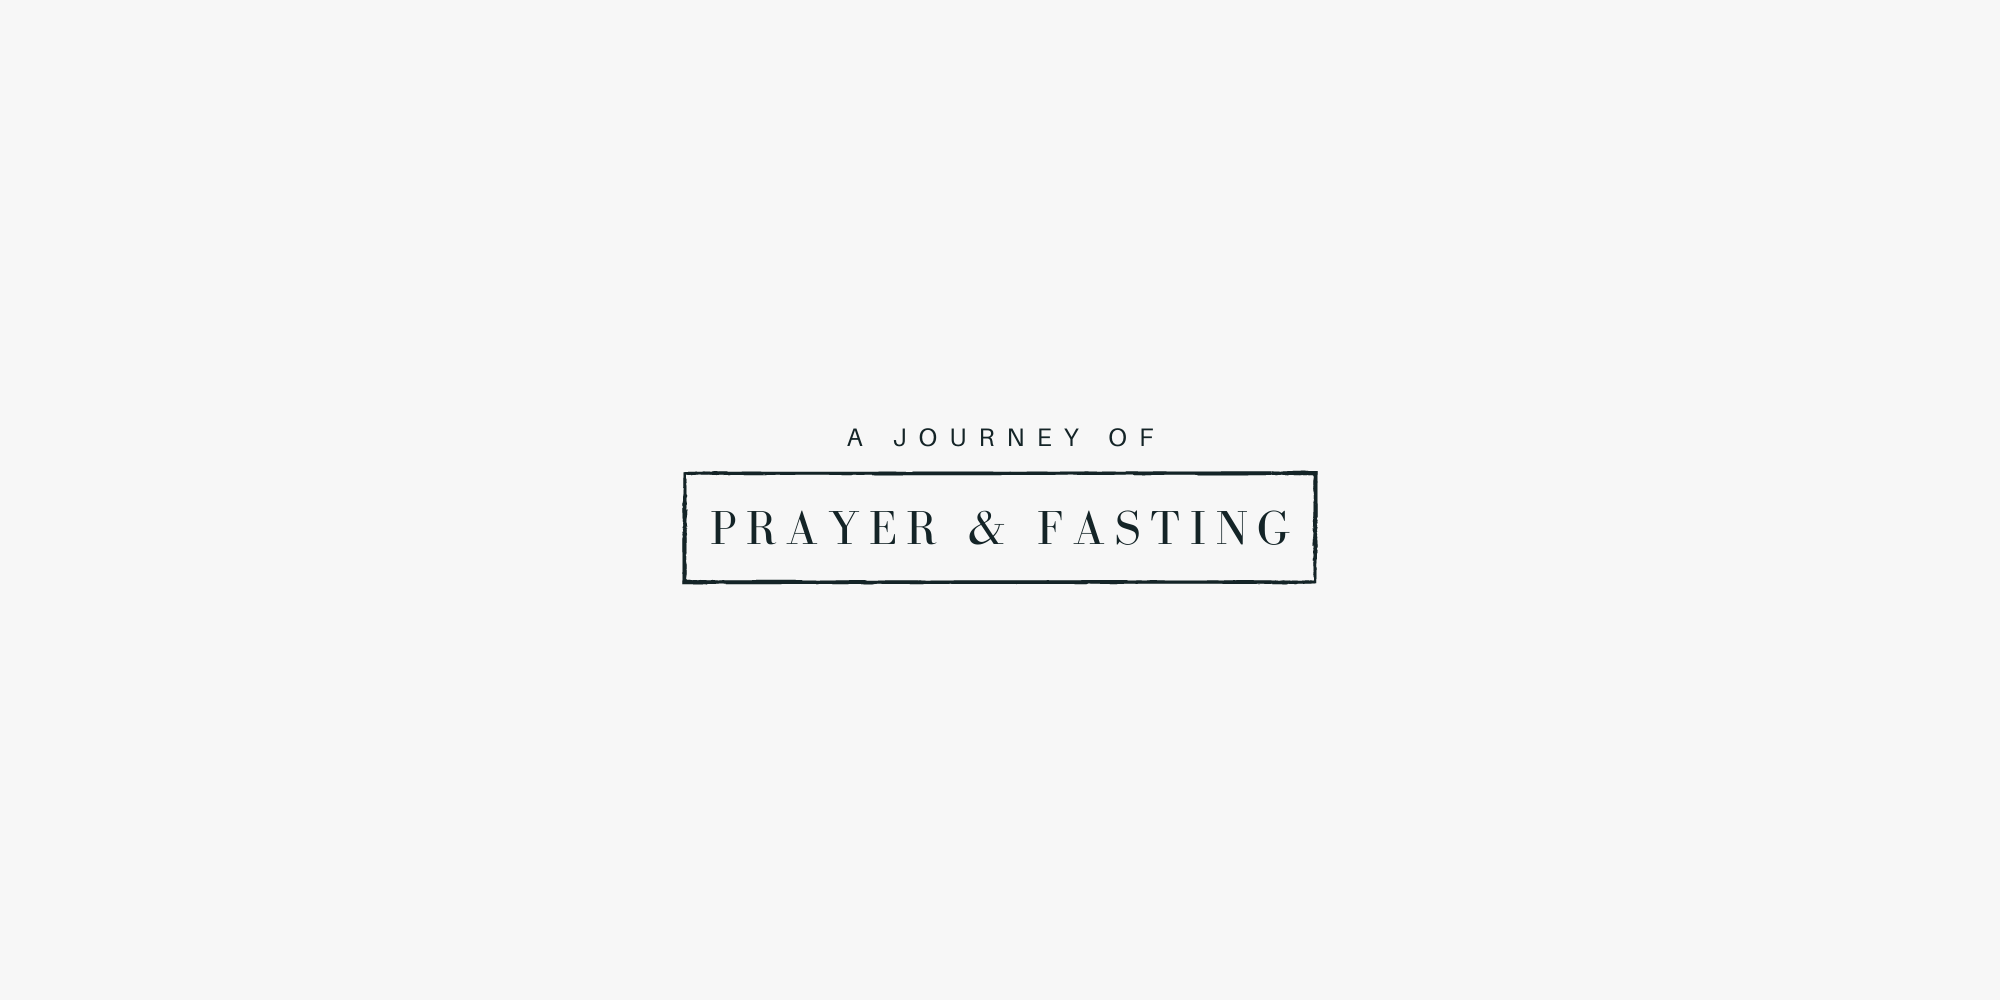 A Journey of Prayer and Fasting